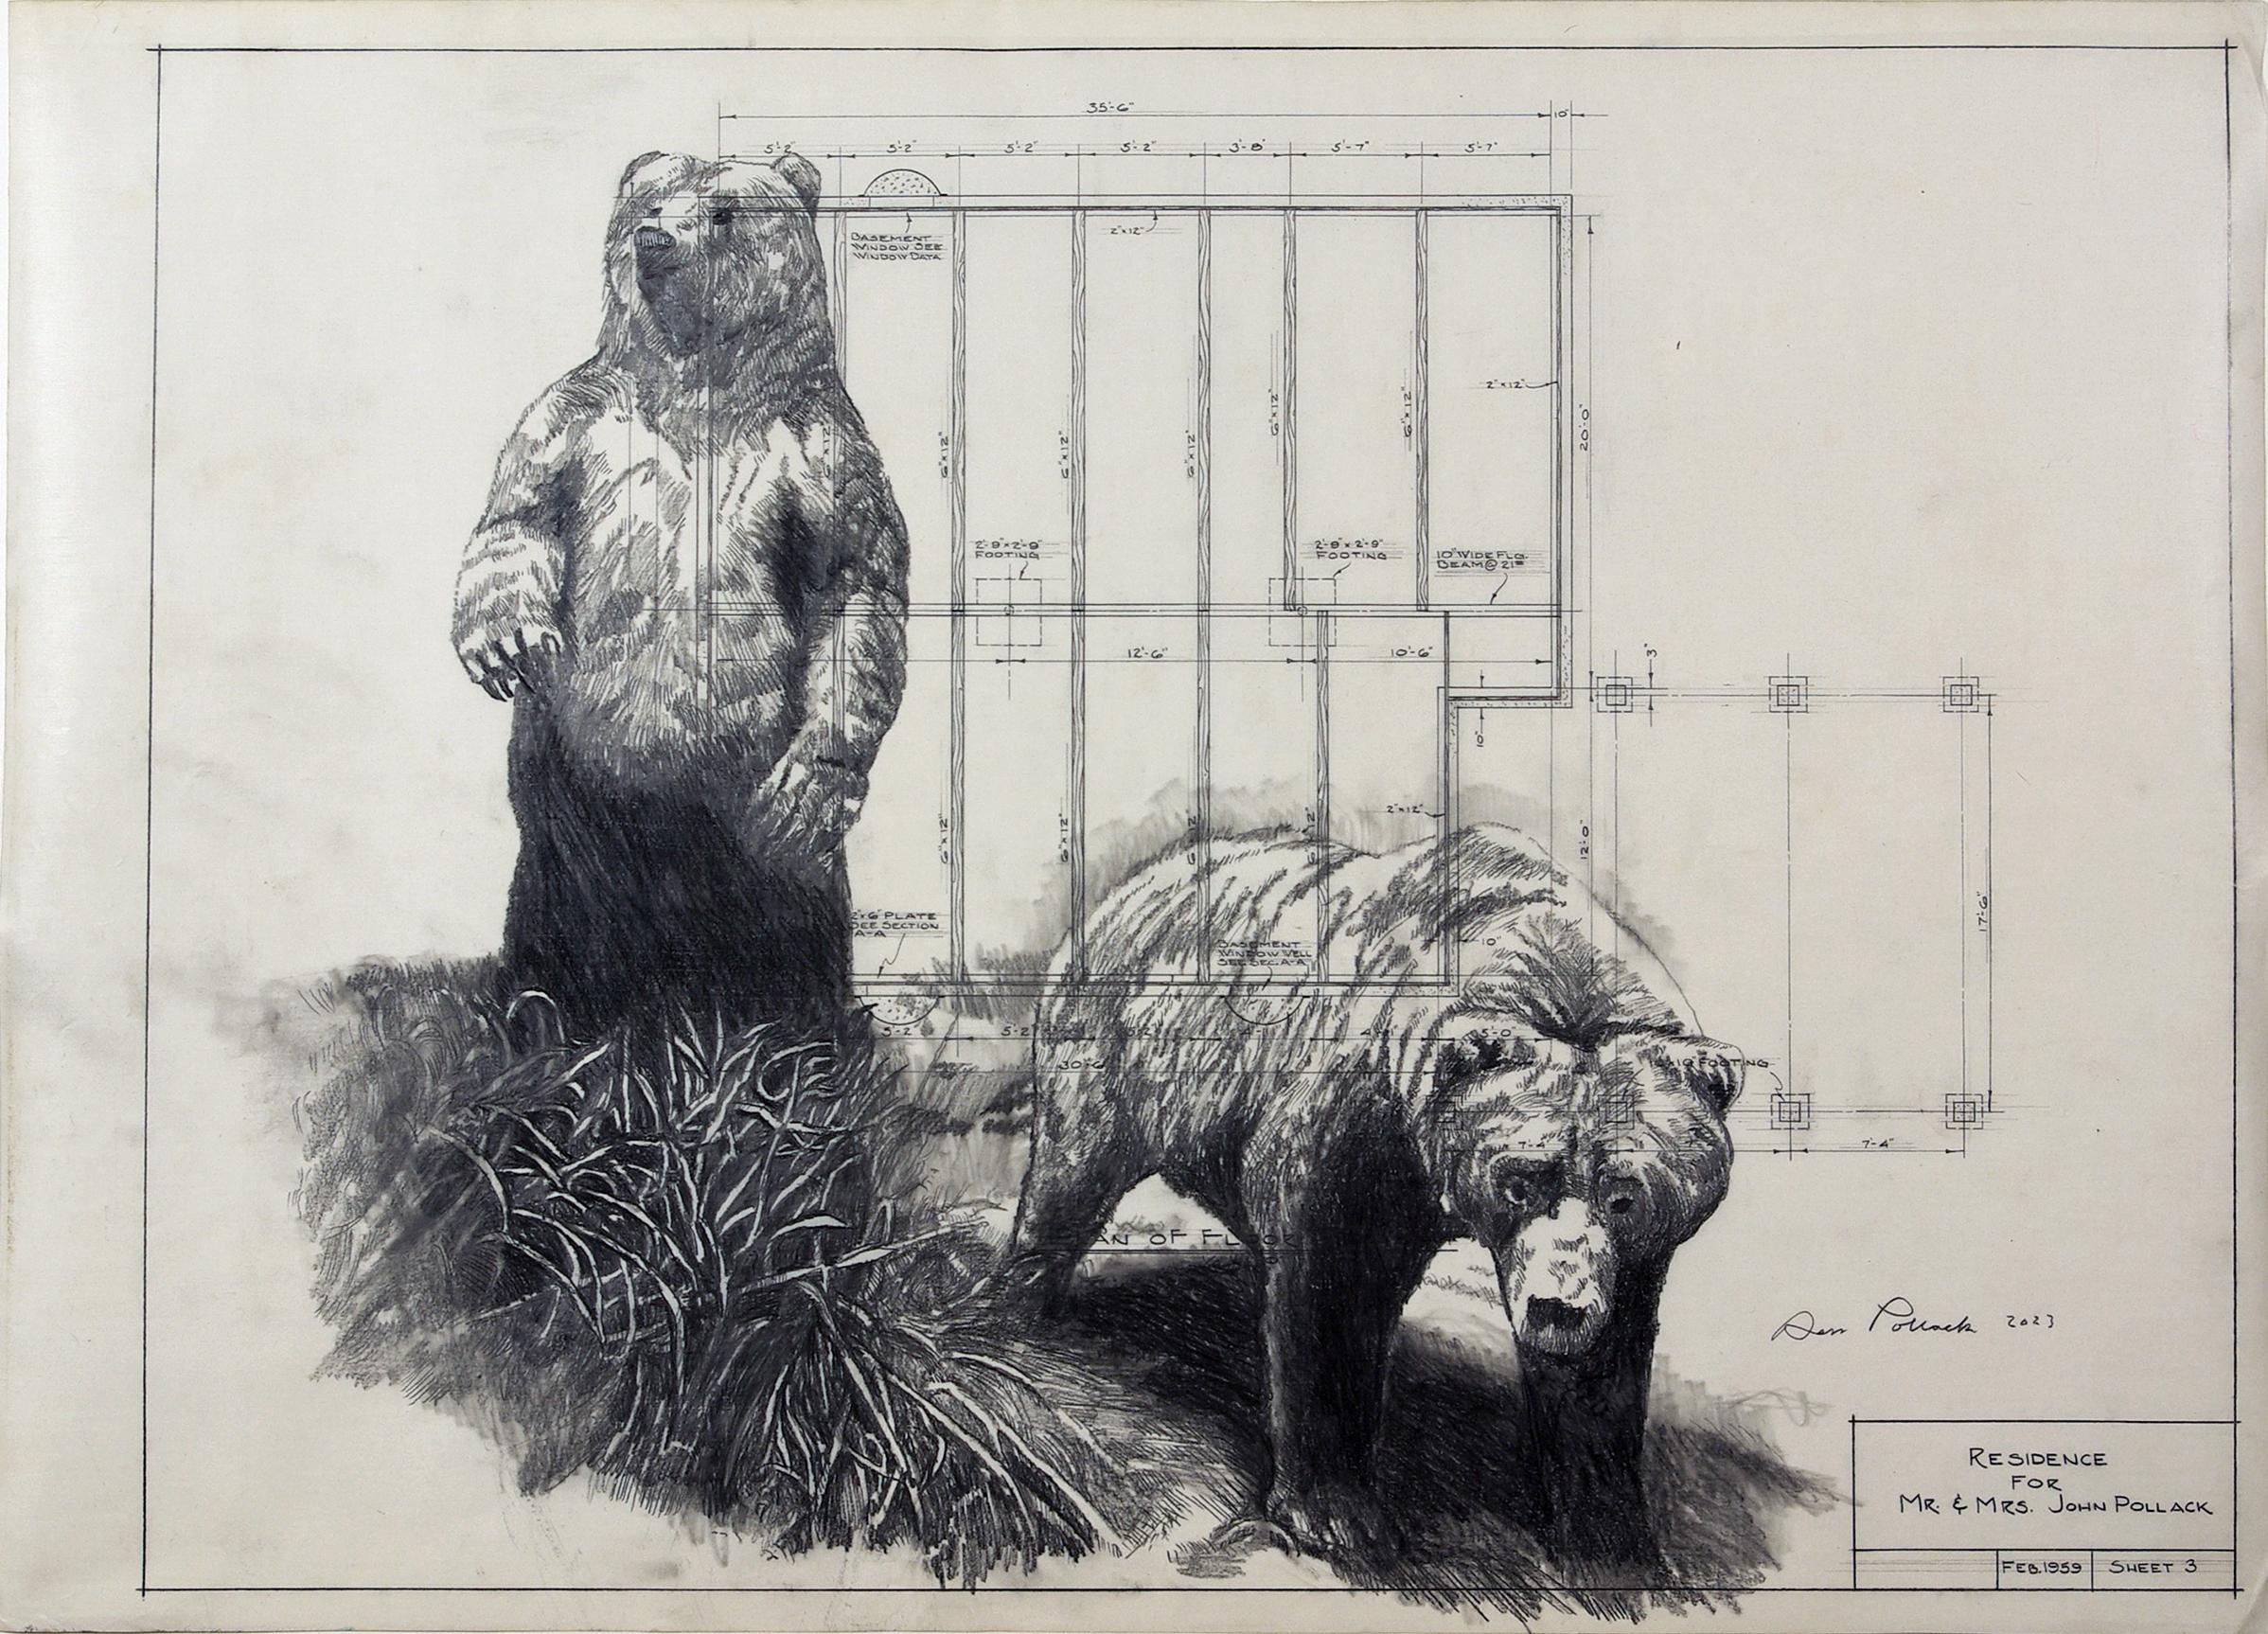 Don Pollack Animal Art - Solid Footings - Graphite Drawing on Antique Architectural Drawings of Bears